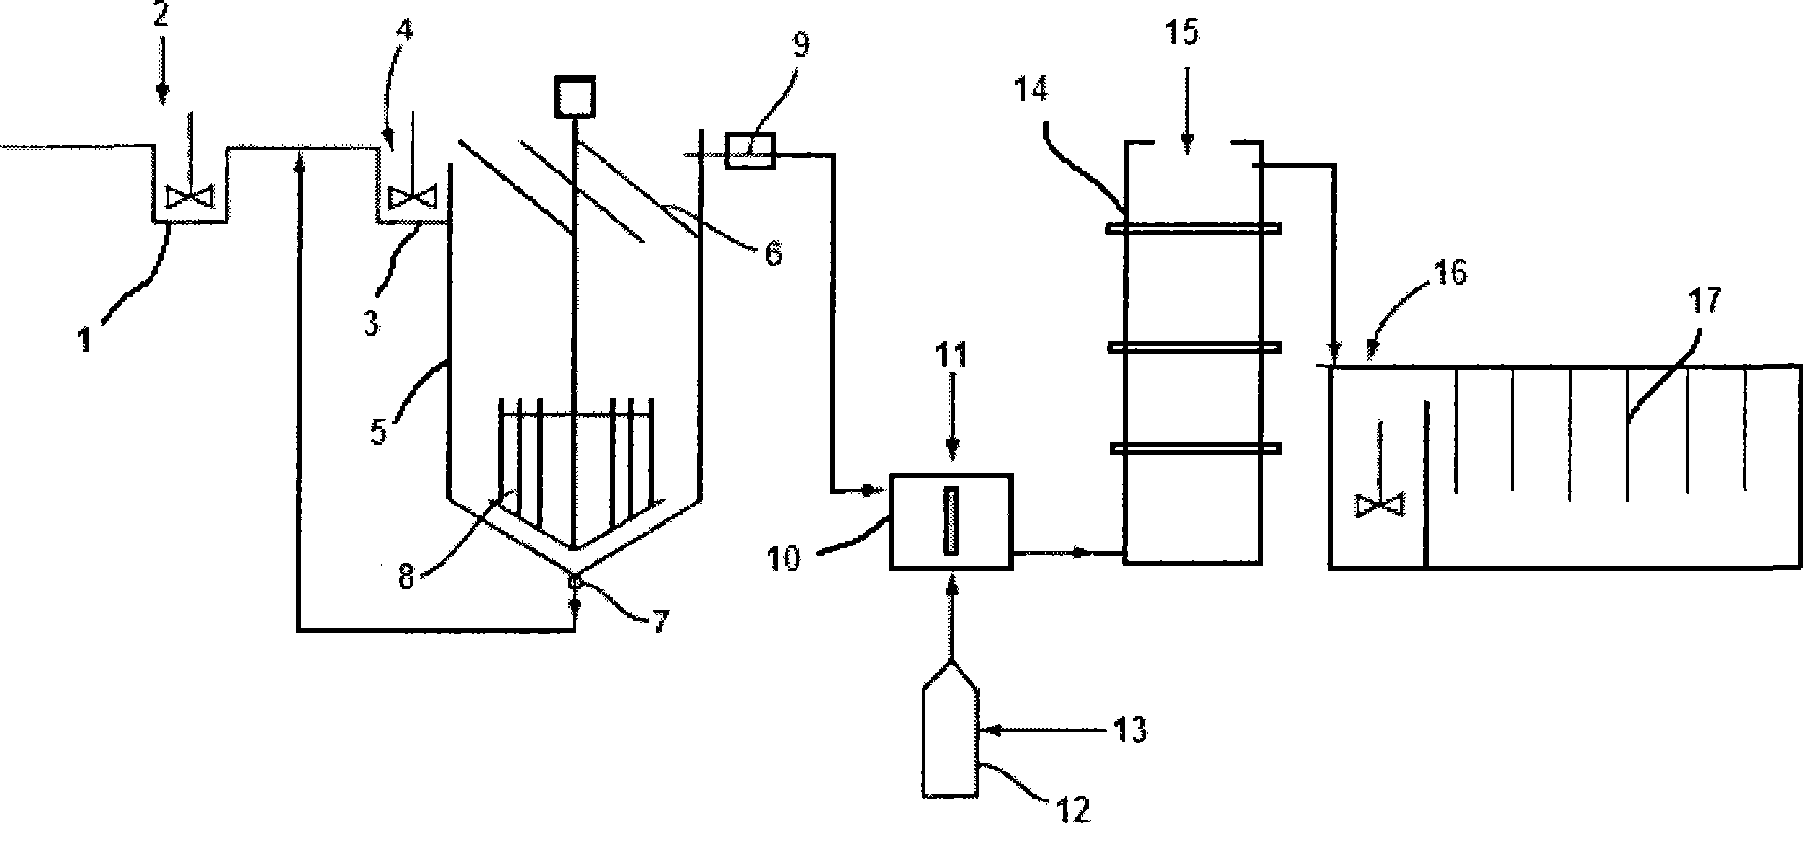 Advanced treatment method and processing system for wastepaper pulping and papermaking waste water